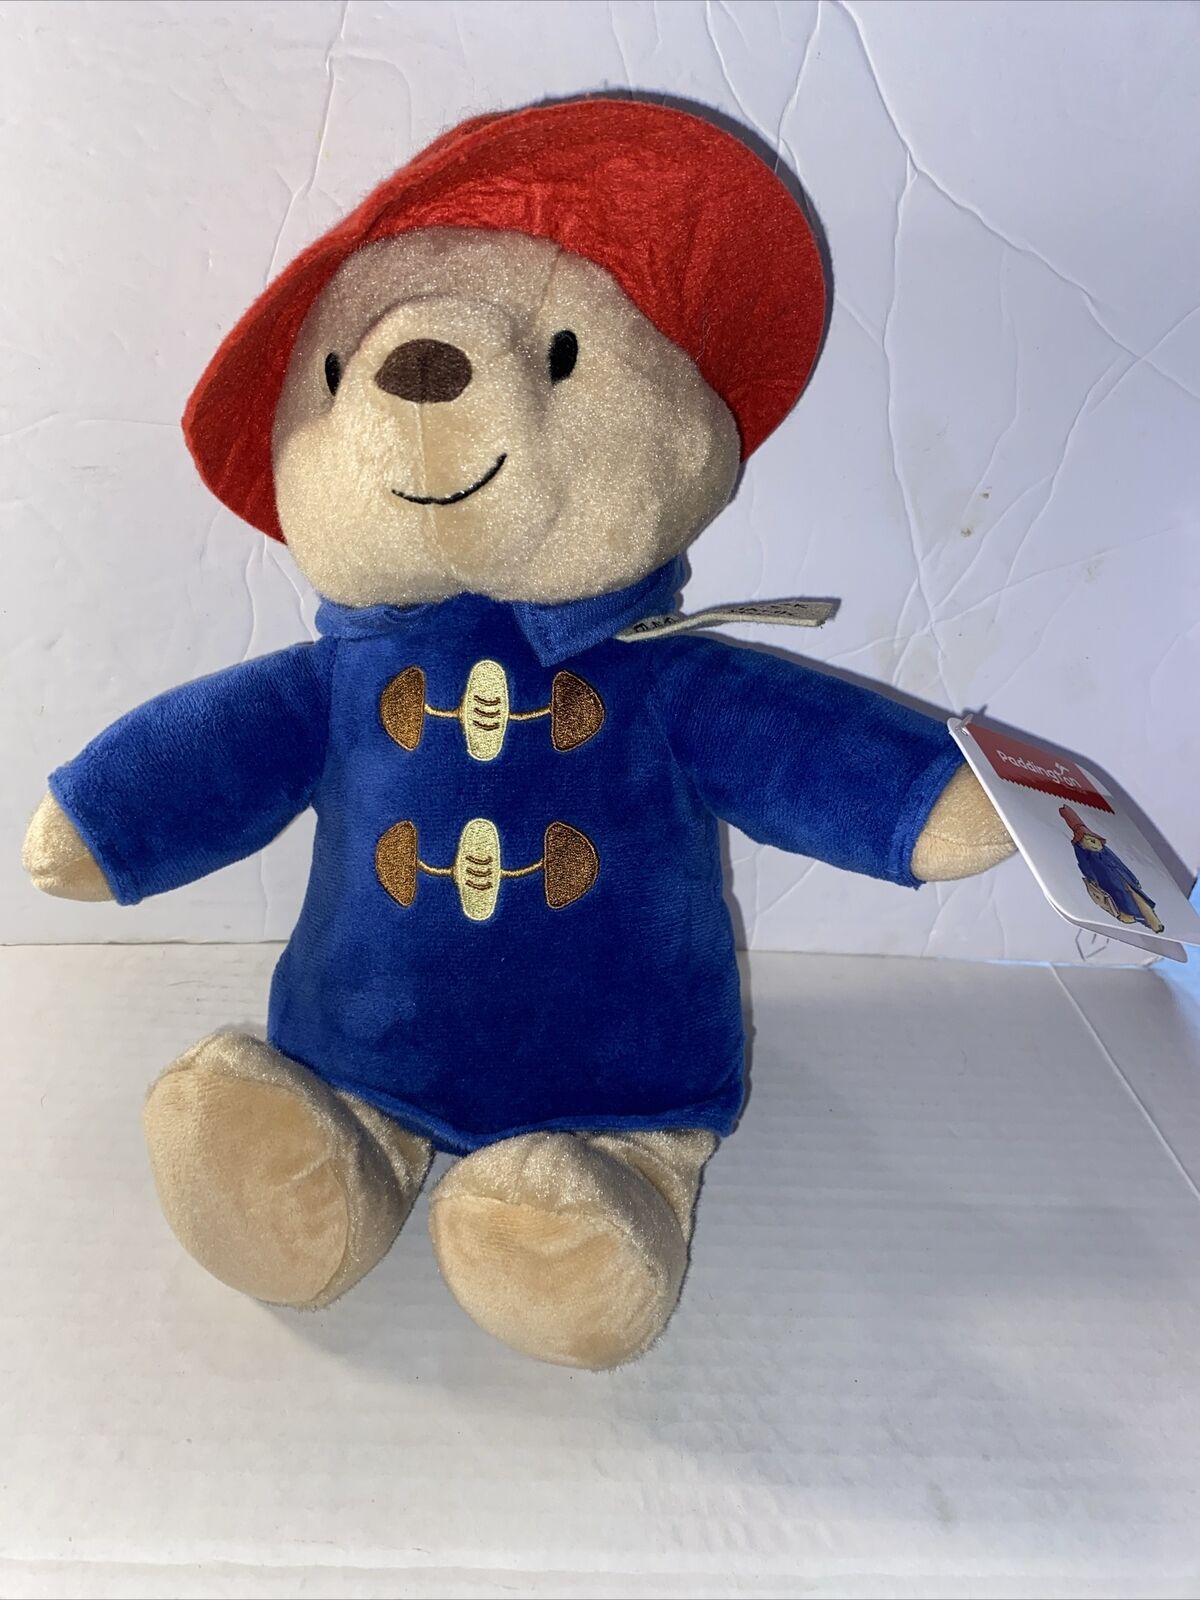 Paddington Bear Stuffed Plush Toy Red Hat BRAND NEW with Tags Kohl's Cares for Kids YOTTOY